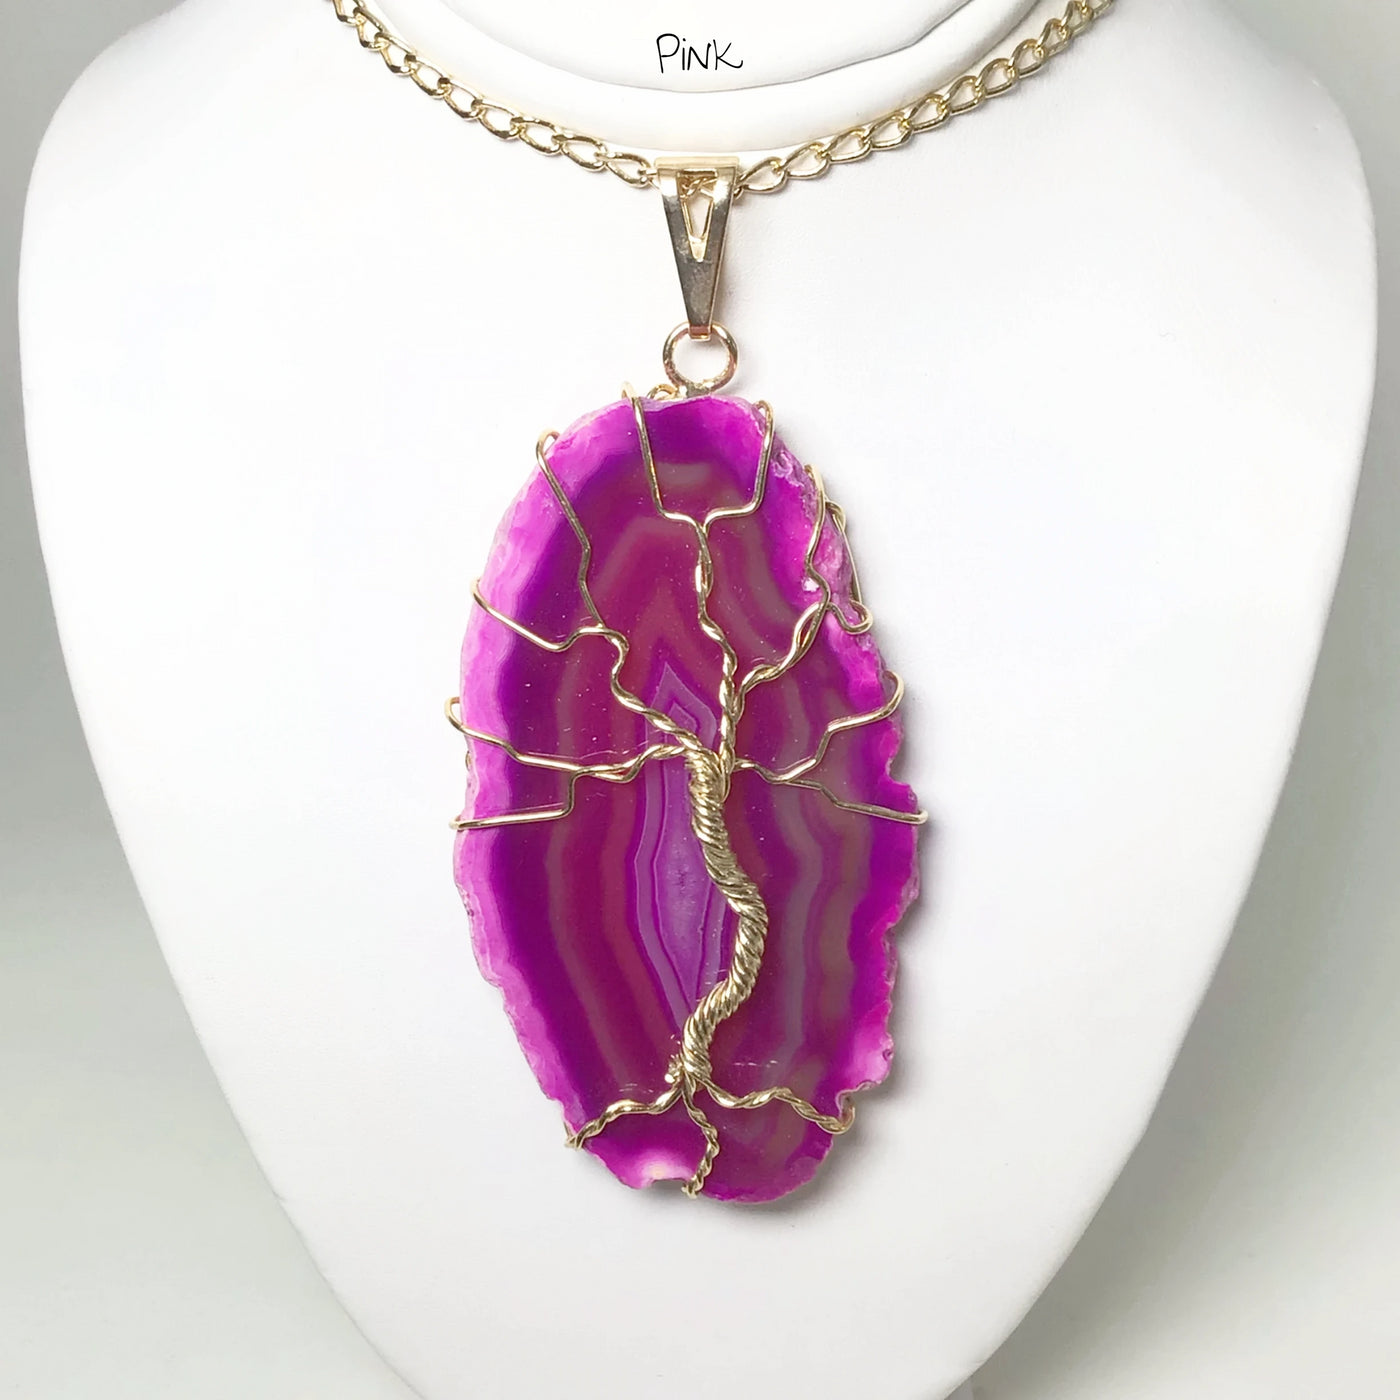 Tree of Life on Agate Slice Necklace - Gold Plated